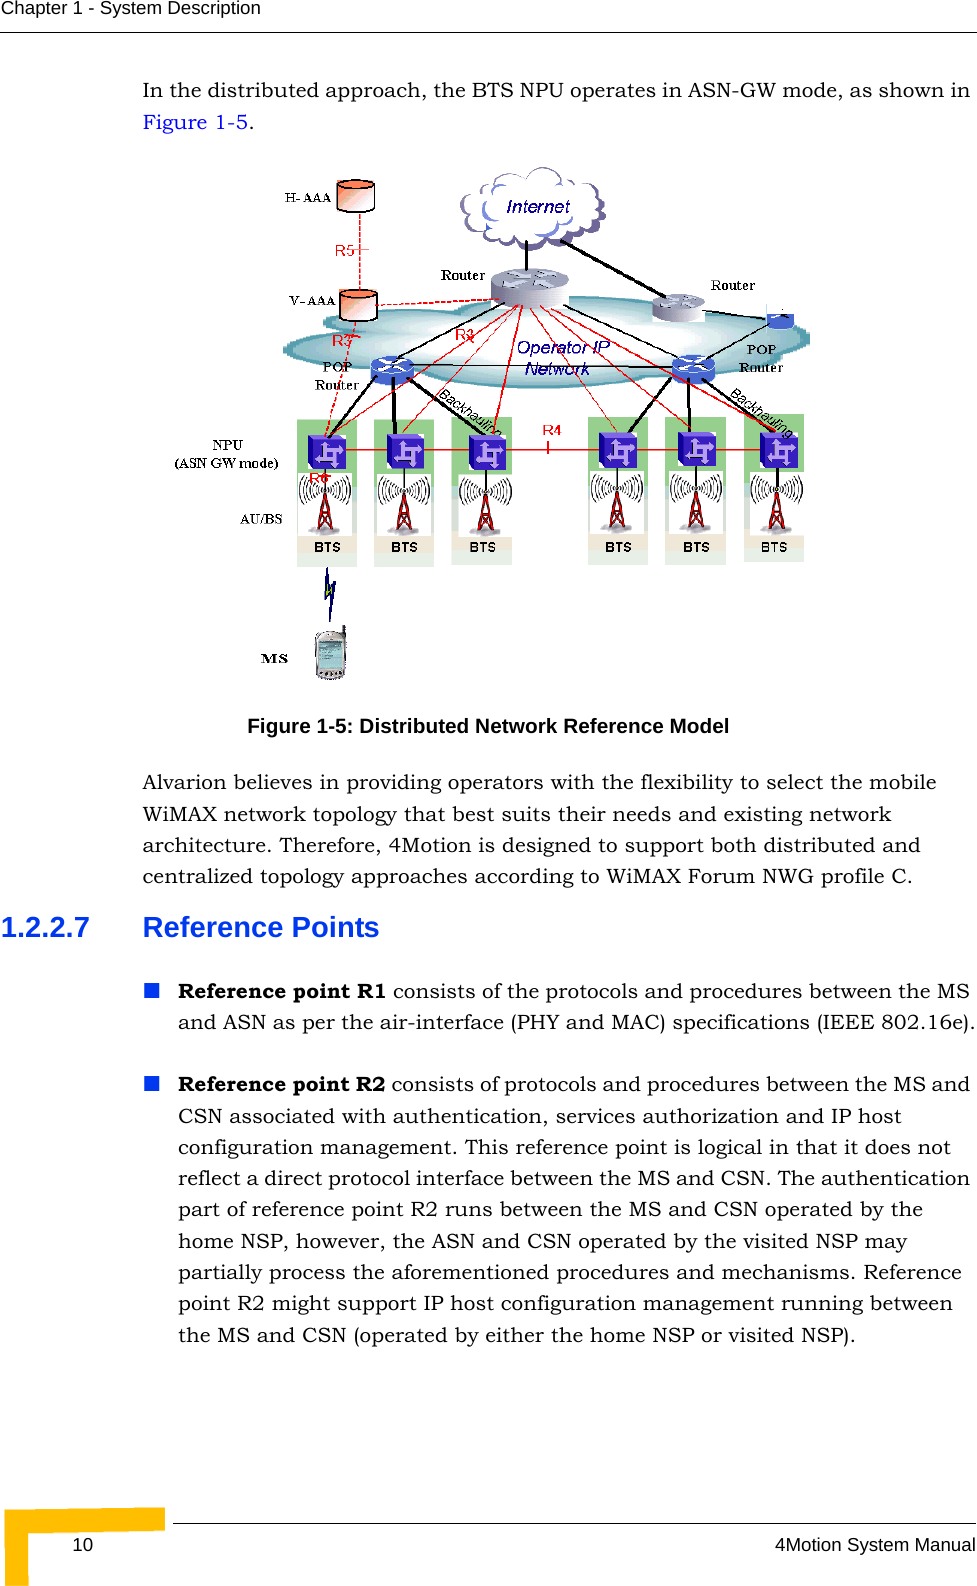 10 4Motion System ManualChapter 1 - System DescriptionIn the distributed approach, the BTS NPU operates in ASN-GW mode, as shown in Figure 1-5. Alvarion believes in providing operators with the flexibility to select the mobile WiMAX network topology that best suits their needs and existing network architecture. Therefore, 4Motion is designed to support both distributed and centralized topology approaches according to WiMAX Forum NWG profile C.1.2.2.7 Reference PointsReference point R1 consists of the protocols and procedures between the MS and ASN as per the air-interface (PHY and MAC) specifications (IEEE 802.16e).Reference point R2 consists of protocols and procedures between the MS and CSN associated with authentication, services authorization and IP host configuration management. This reference point is logical in that it does not reflect a direct protocol interface between the MS and CSN. The authentication part of reference point R2 runs between the MS and CSN operated by the home NSP, however, the ASN and CSN operated by the visited NSP may partially process the aforementioned procedures and mechanisms. Reference point R2 might support IP host configuration management running between the MS and CSN (operated by either the home NSP or visited NSP).Figure 1-5: Distributed Network Reference Model